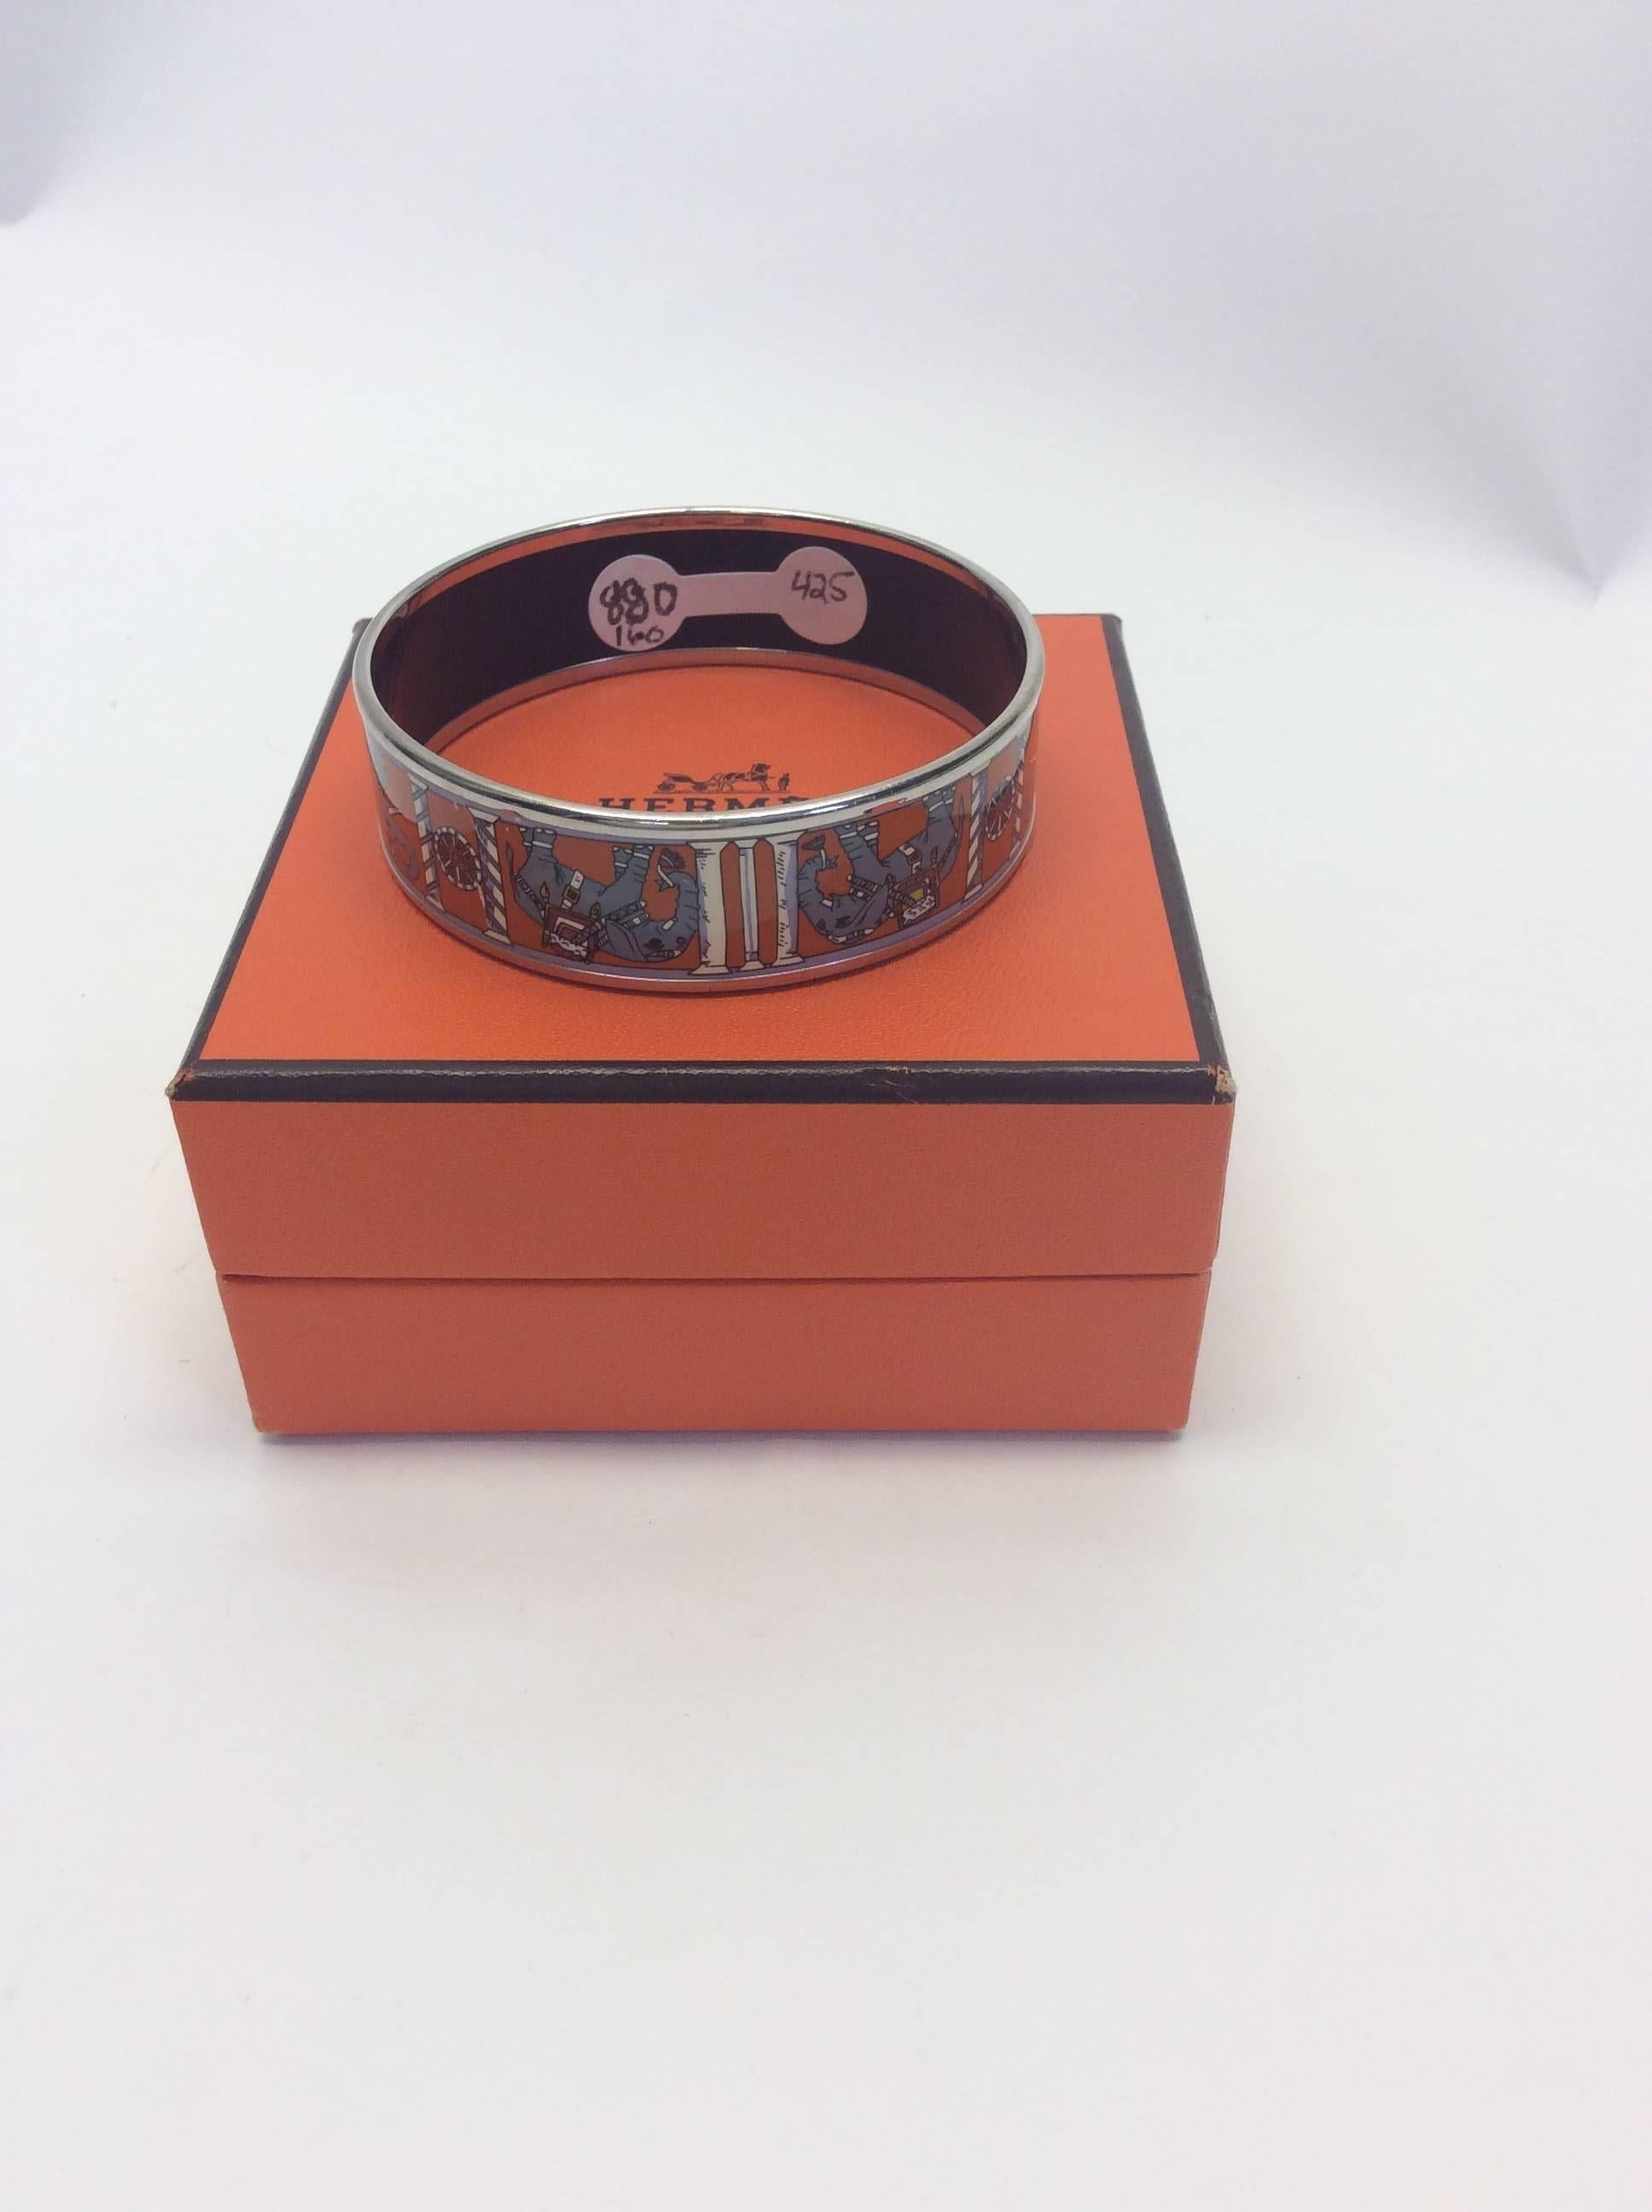 Hermes "Torana" Bangle
Elephant printed
Orange and silver
3 inches wide, 6 inches around
$425
Made in France
